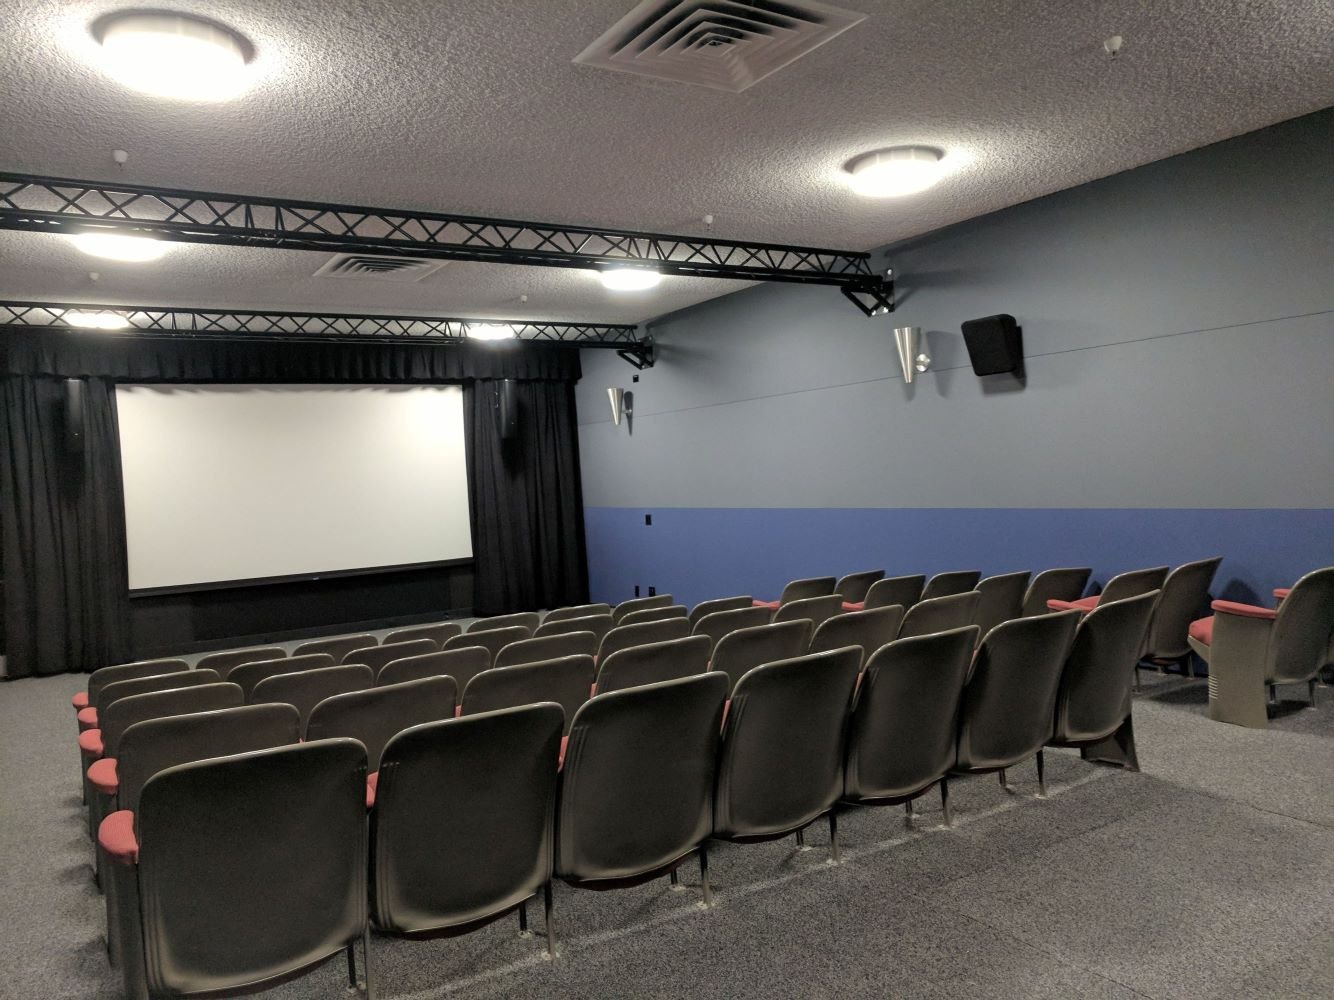 a theater room with a large screen and multiple rows of seats